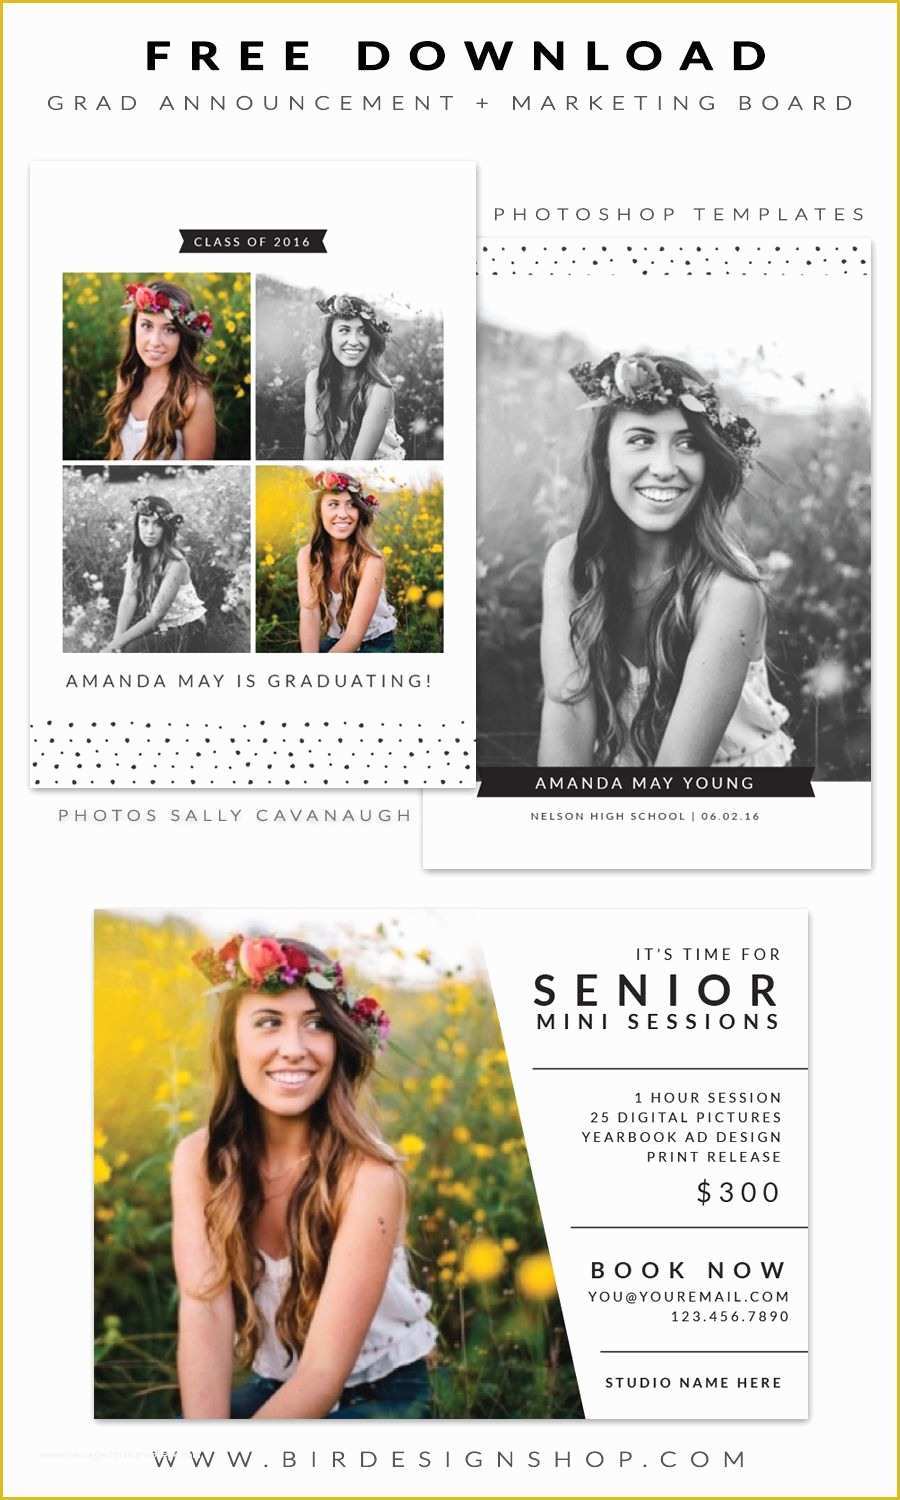 Free Photoshop Marketing Templates for Photographers Of Free Grad Announcement and Marketing Board